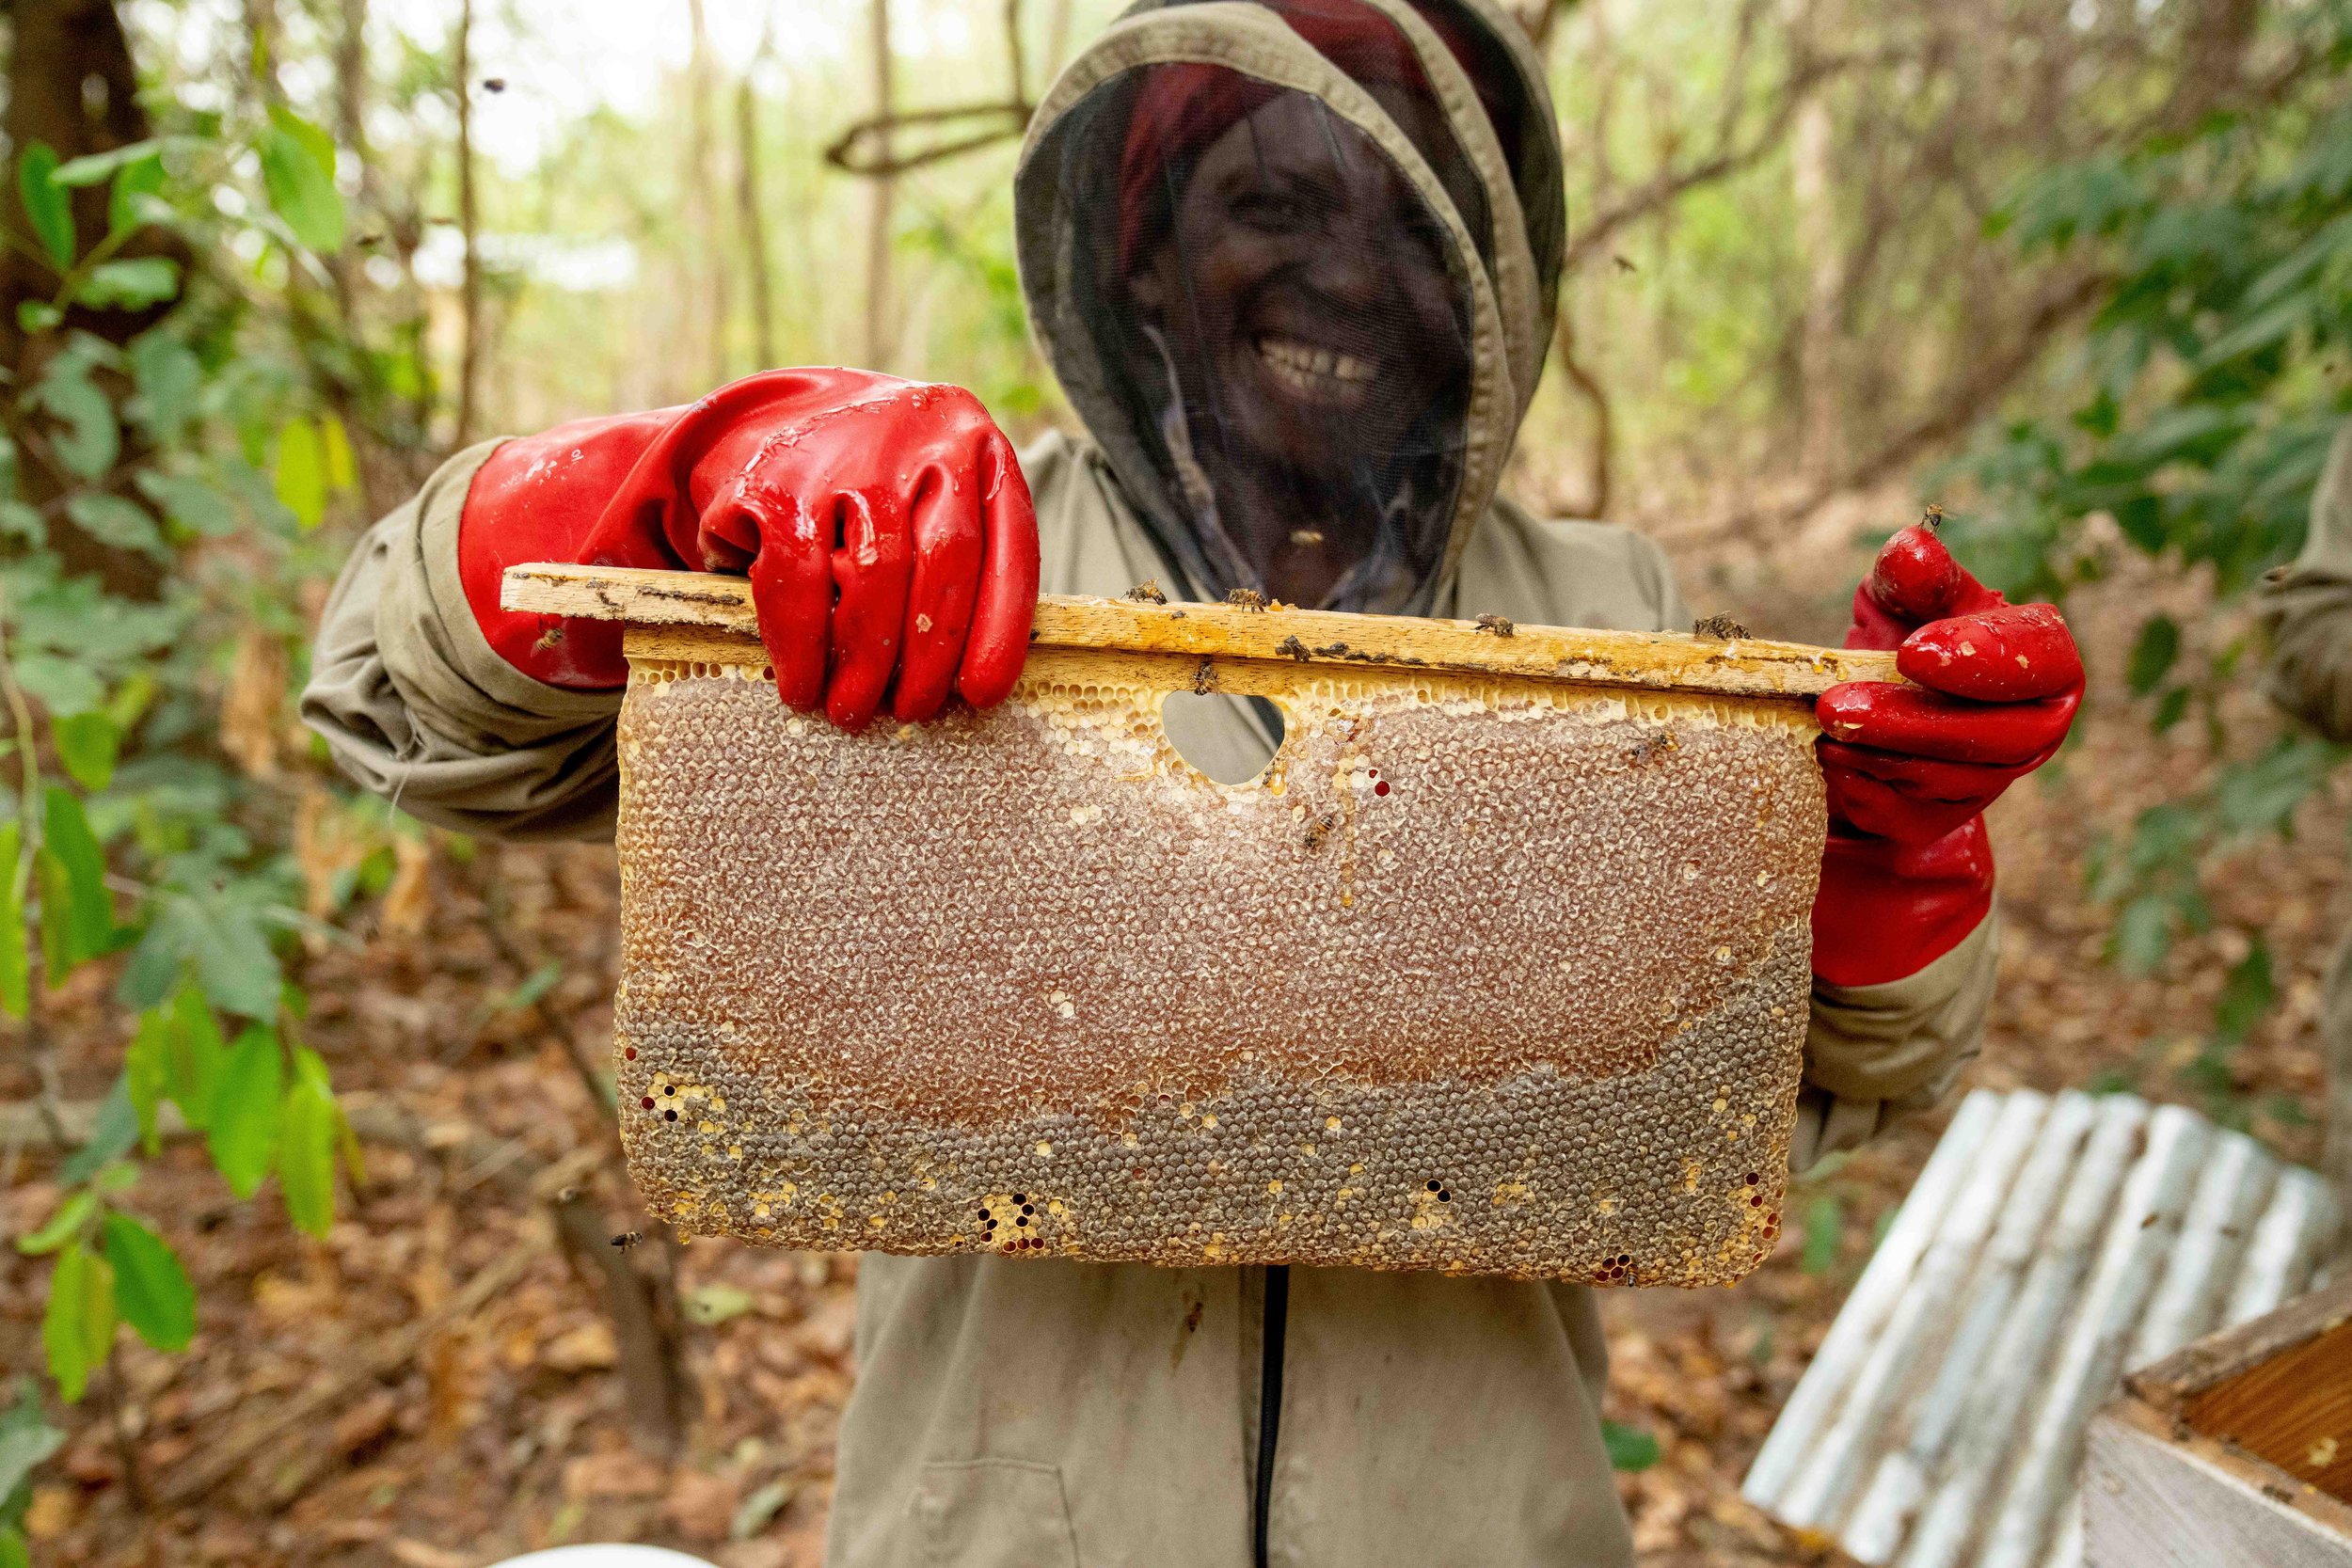  This women's group of new bee keepers in Afram Plains successfully harvest their first season.  